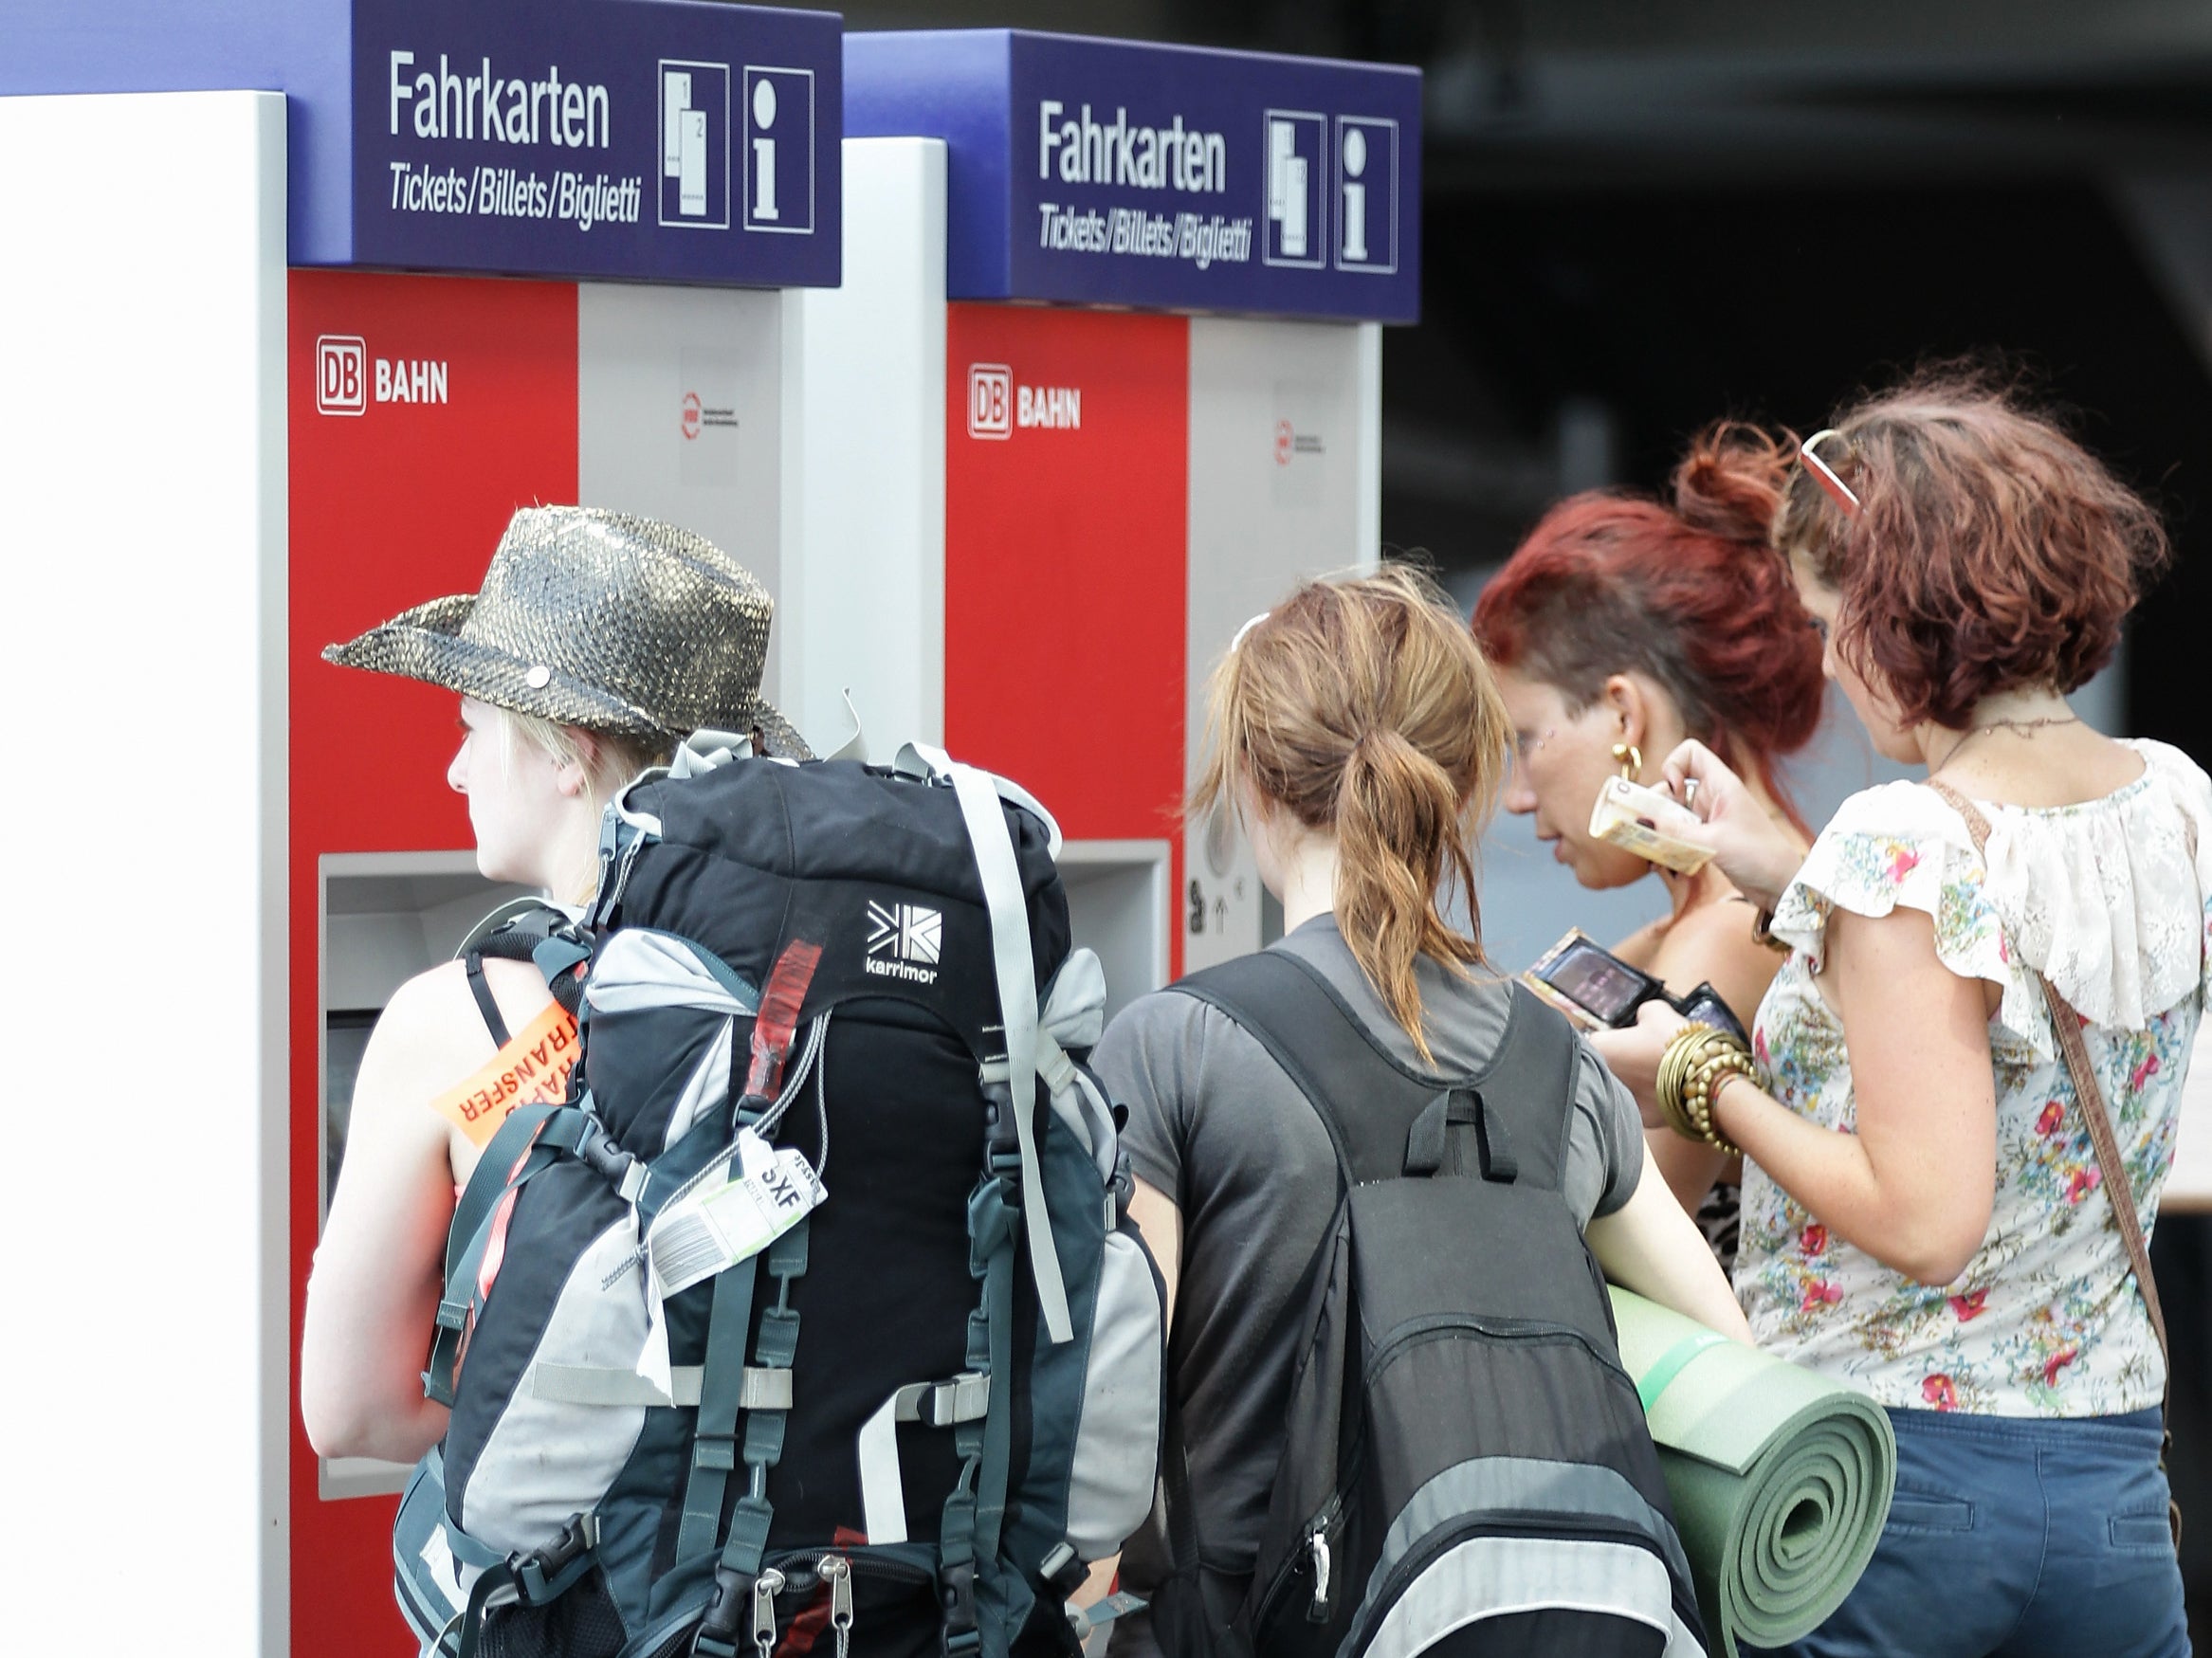 Backpackers queue up at a ticket machine at Hauptbahnhof train station in Berlin, Germany